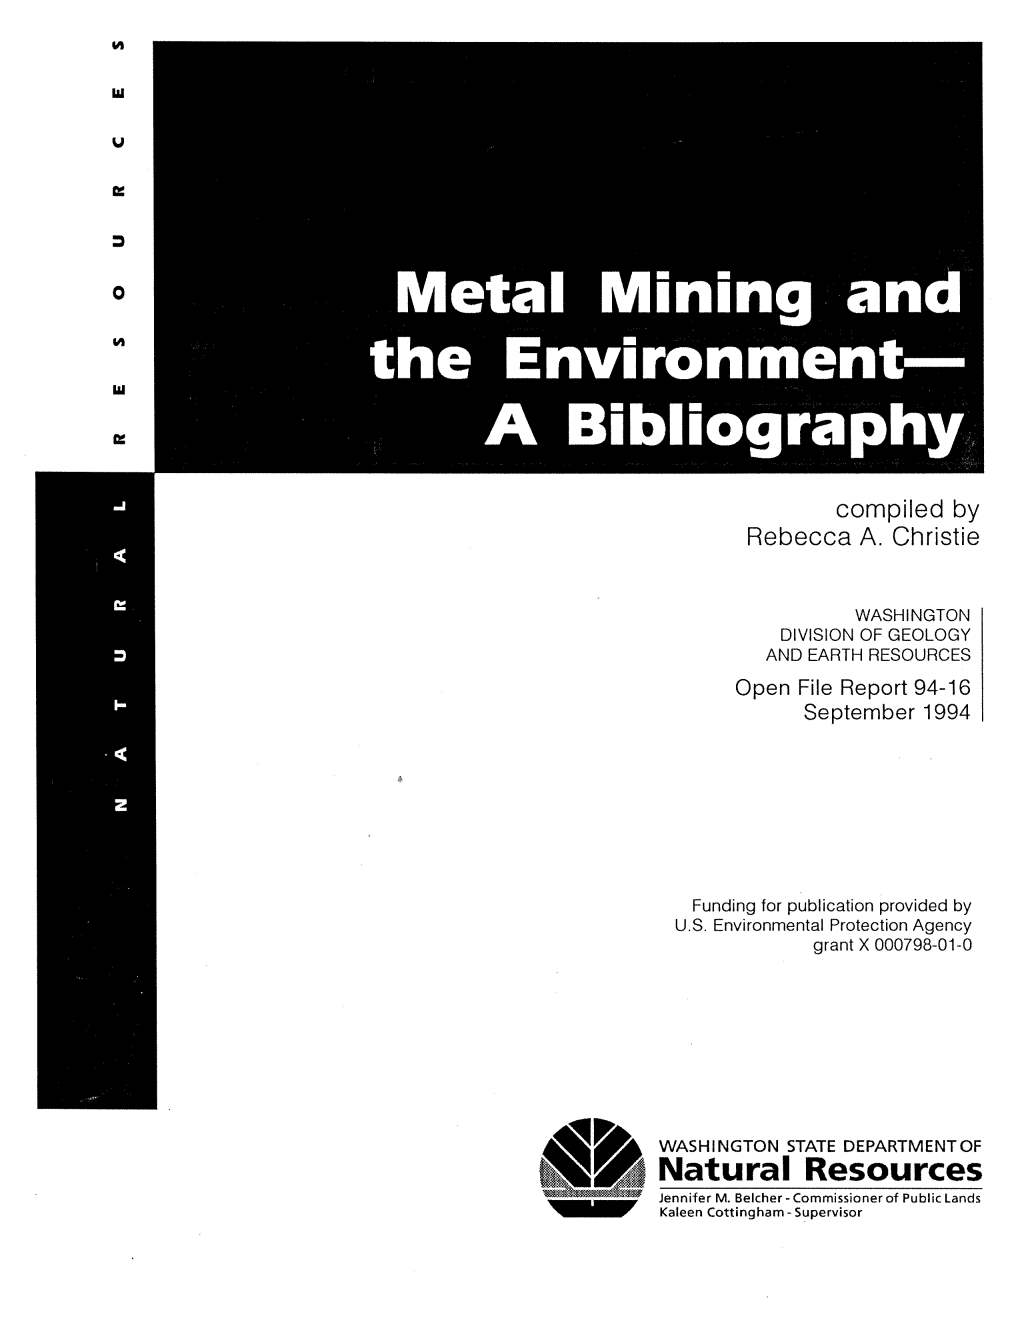 Metal Mining and the Environment—A Bibliography